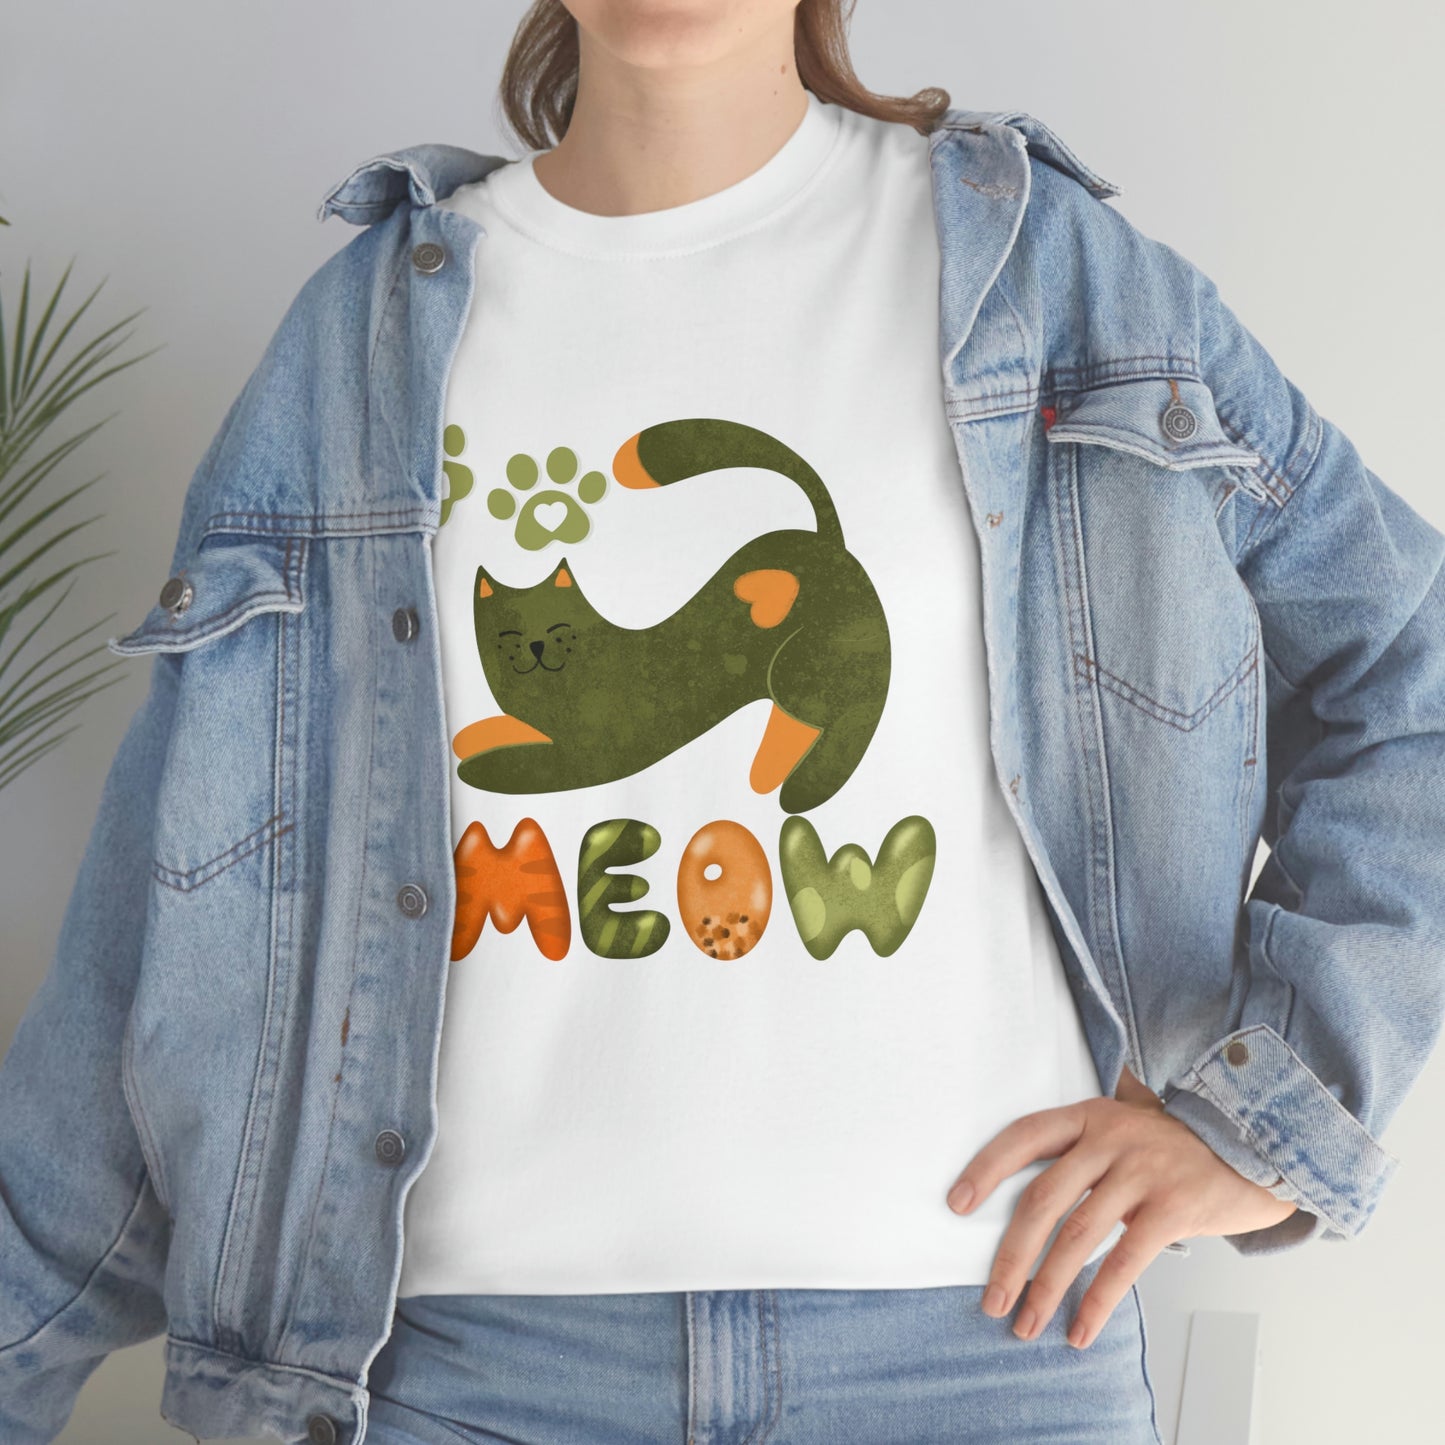 "Meow" Cute Green Cat with Paws design Cotton Tee